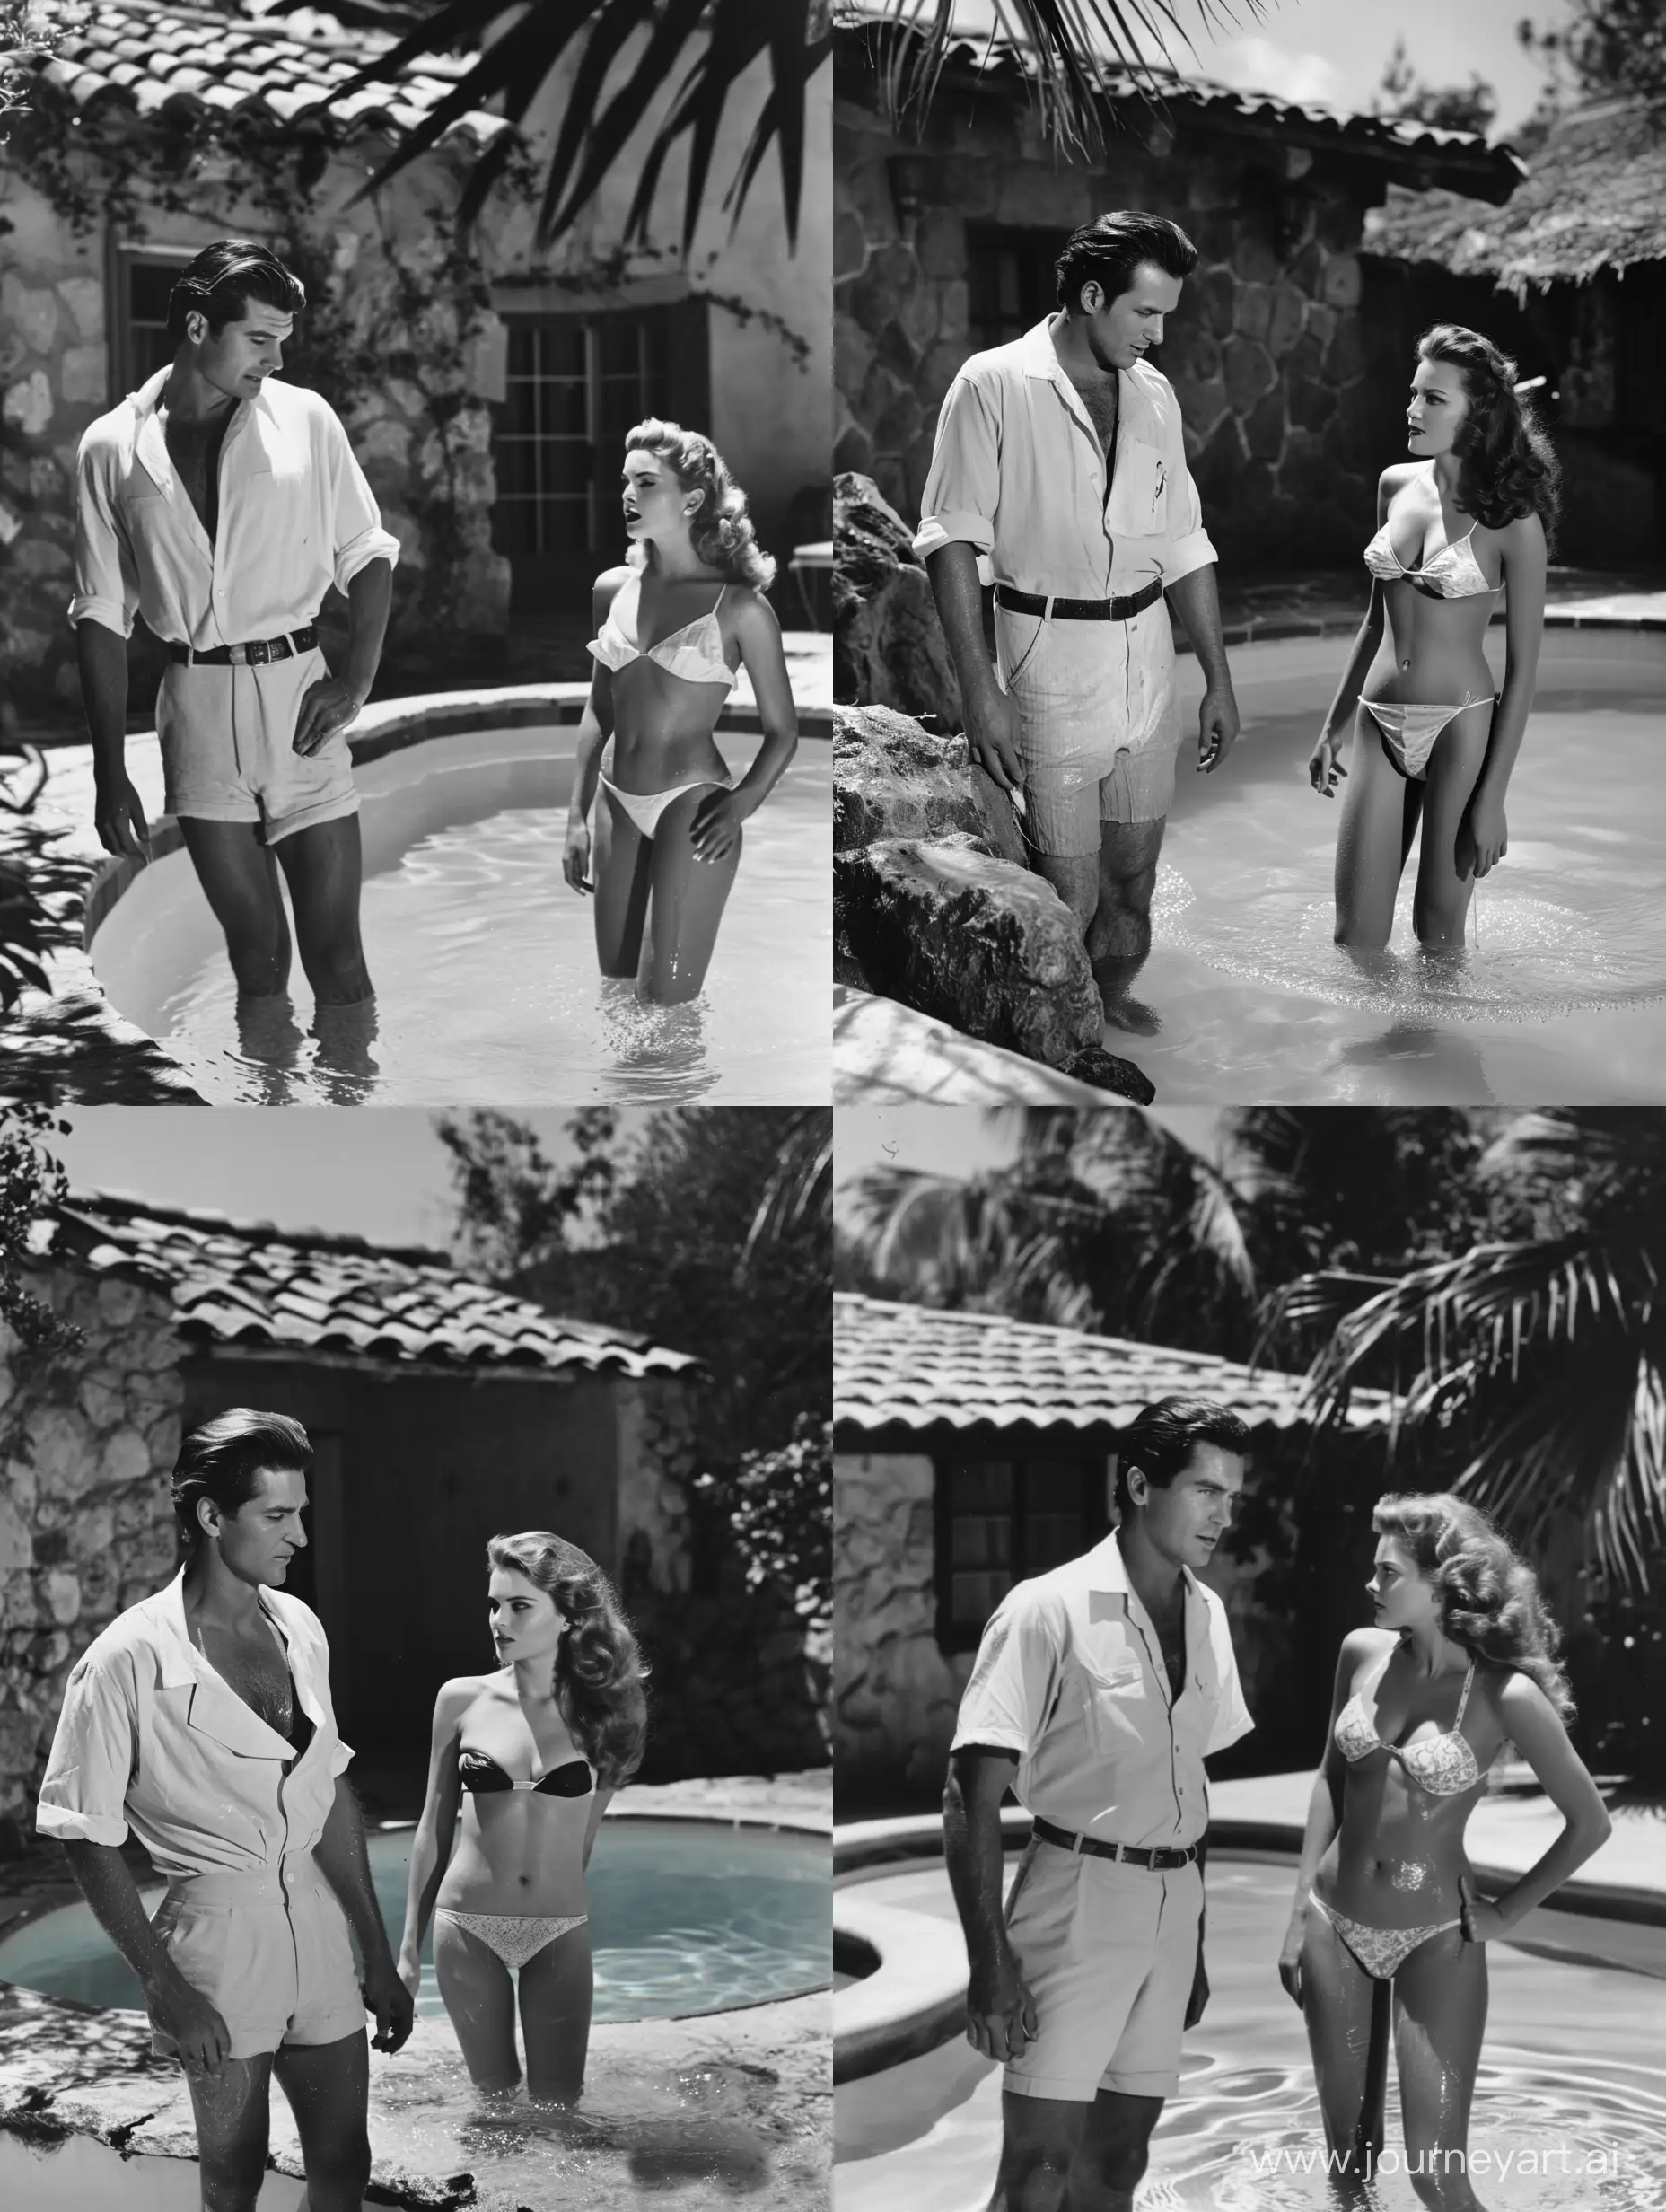 1940s-Film-Noir-Poolside-Encounter-with-Handsome-Movie-Star-and-Femme-Fatale